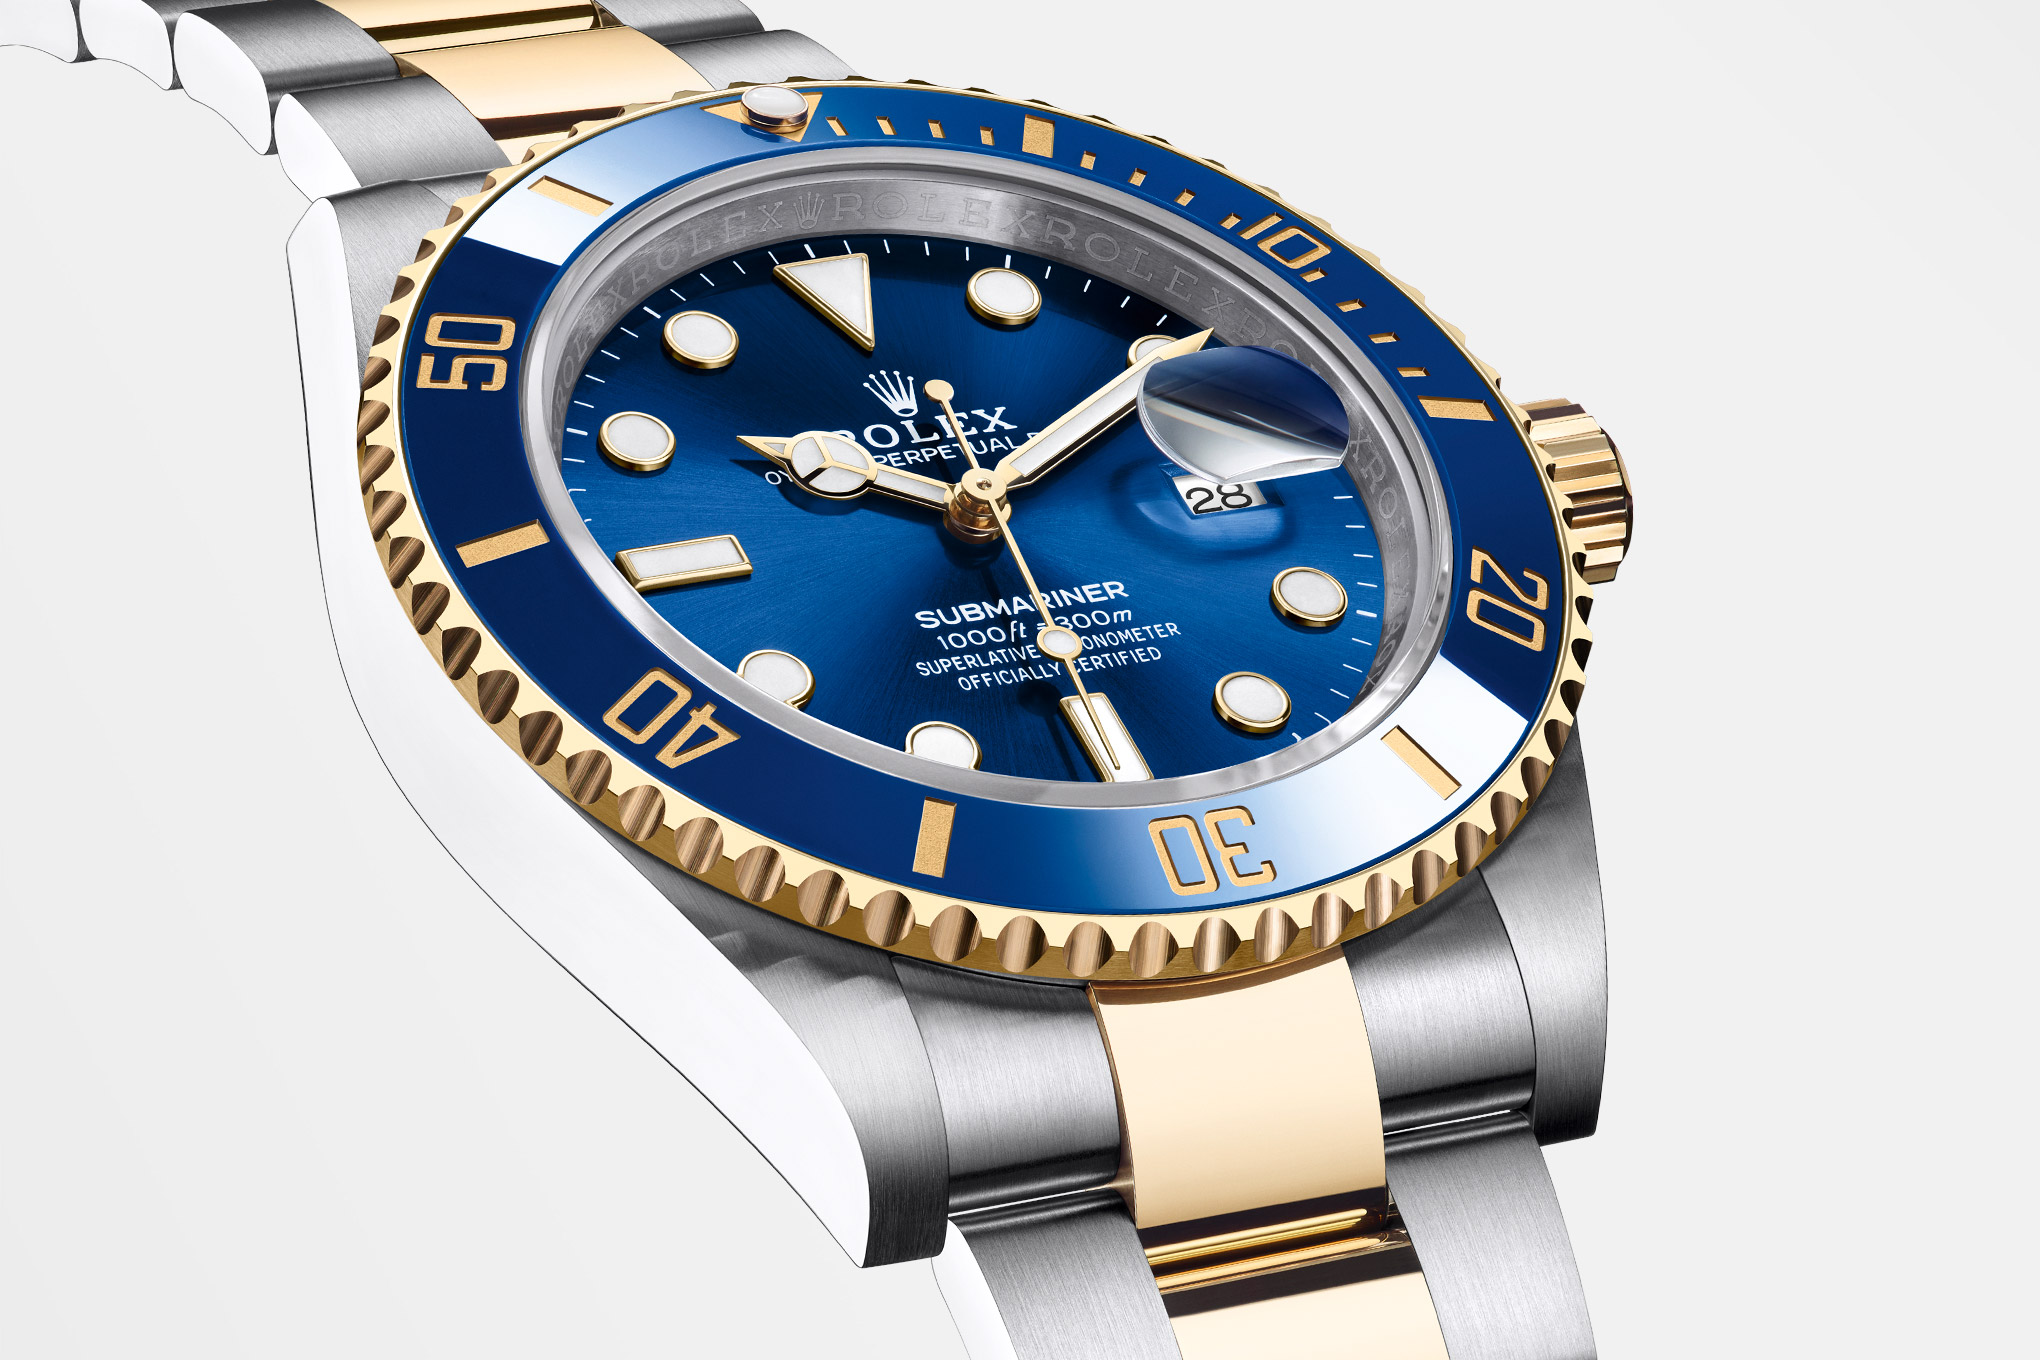 Rolex Submariner - The Reference Among 